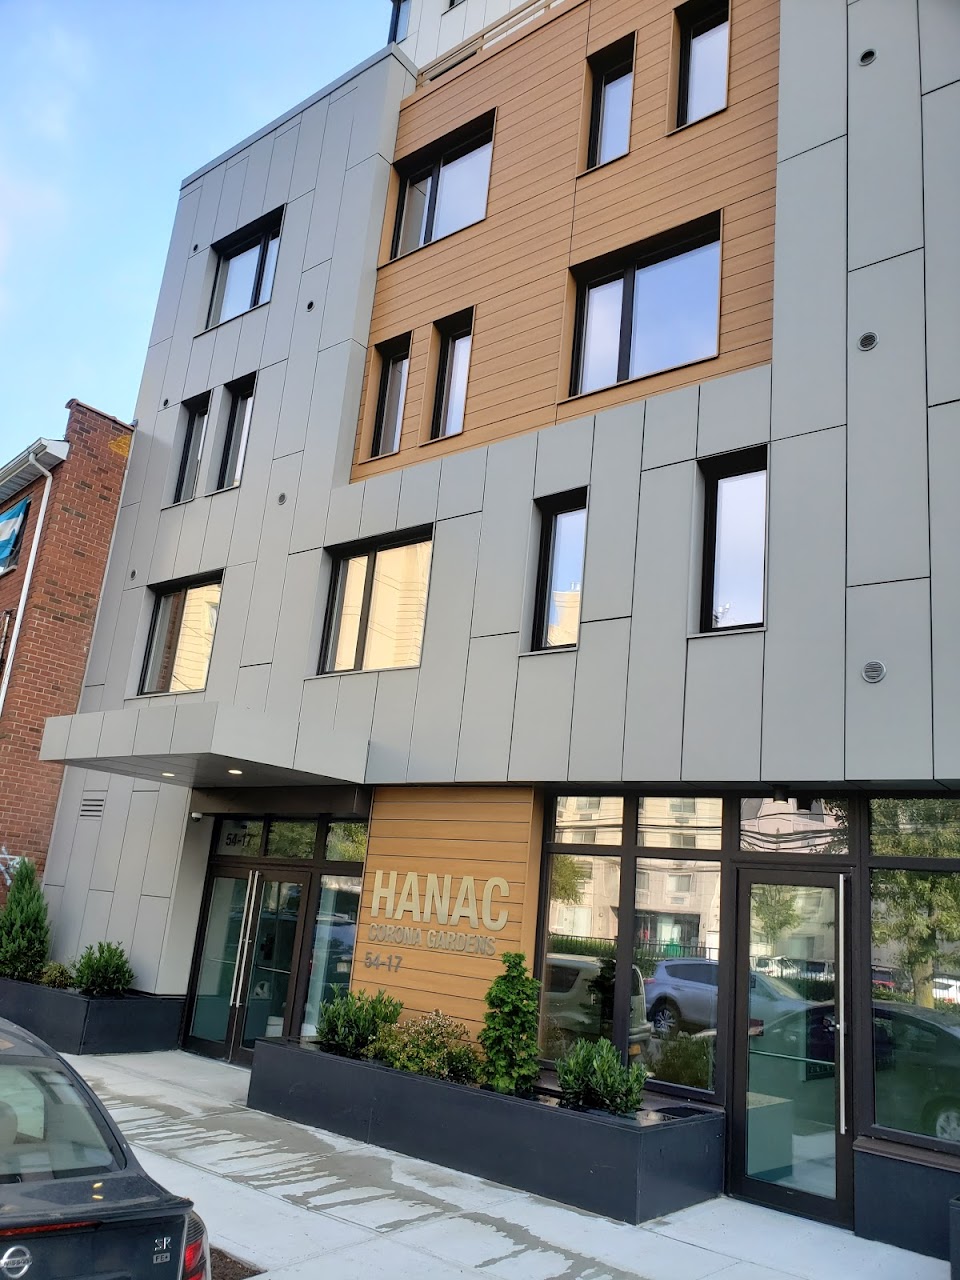 Photo of HANAC CORONA. Affordable housing located at 101ST STREET QUEENS, NY 11368